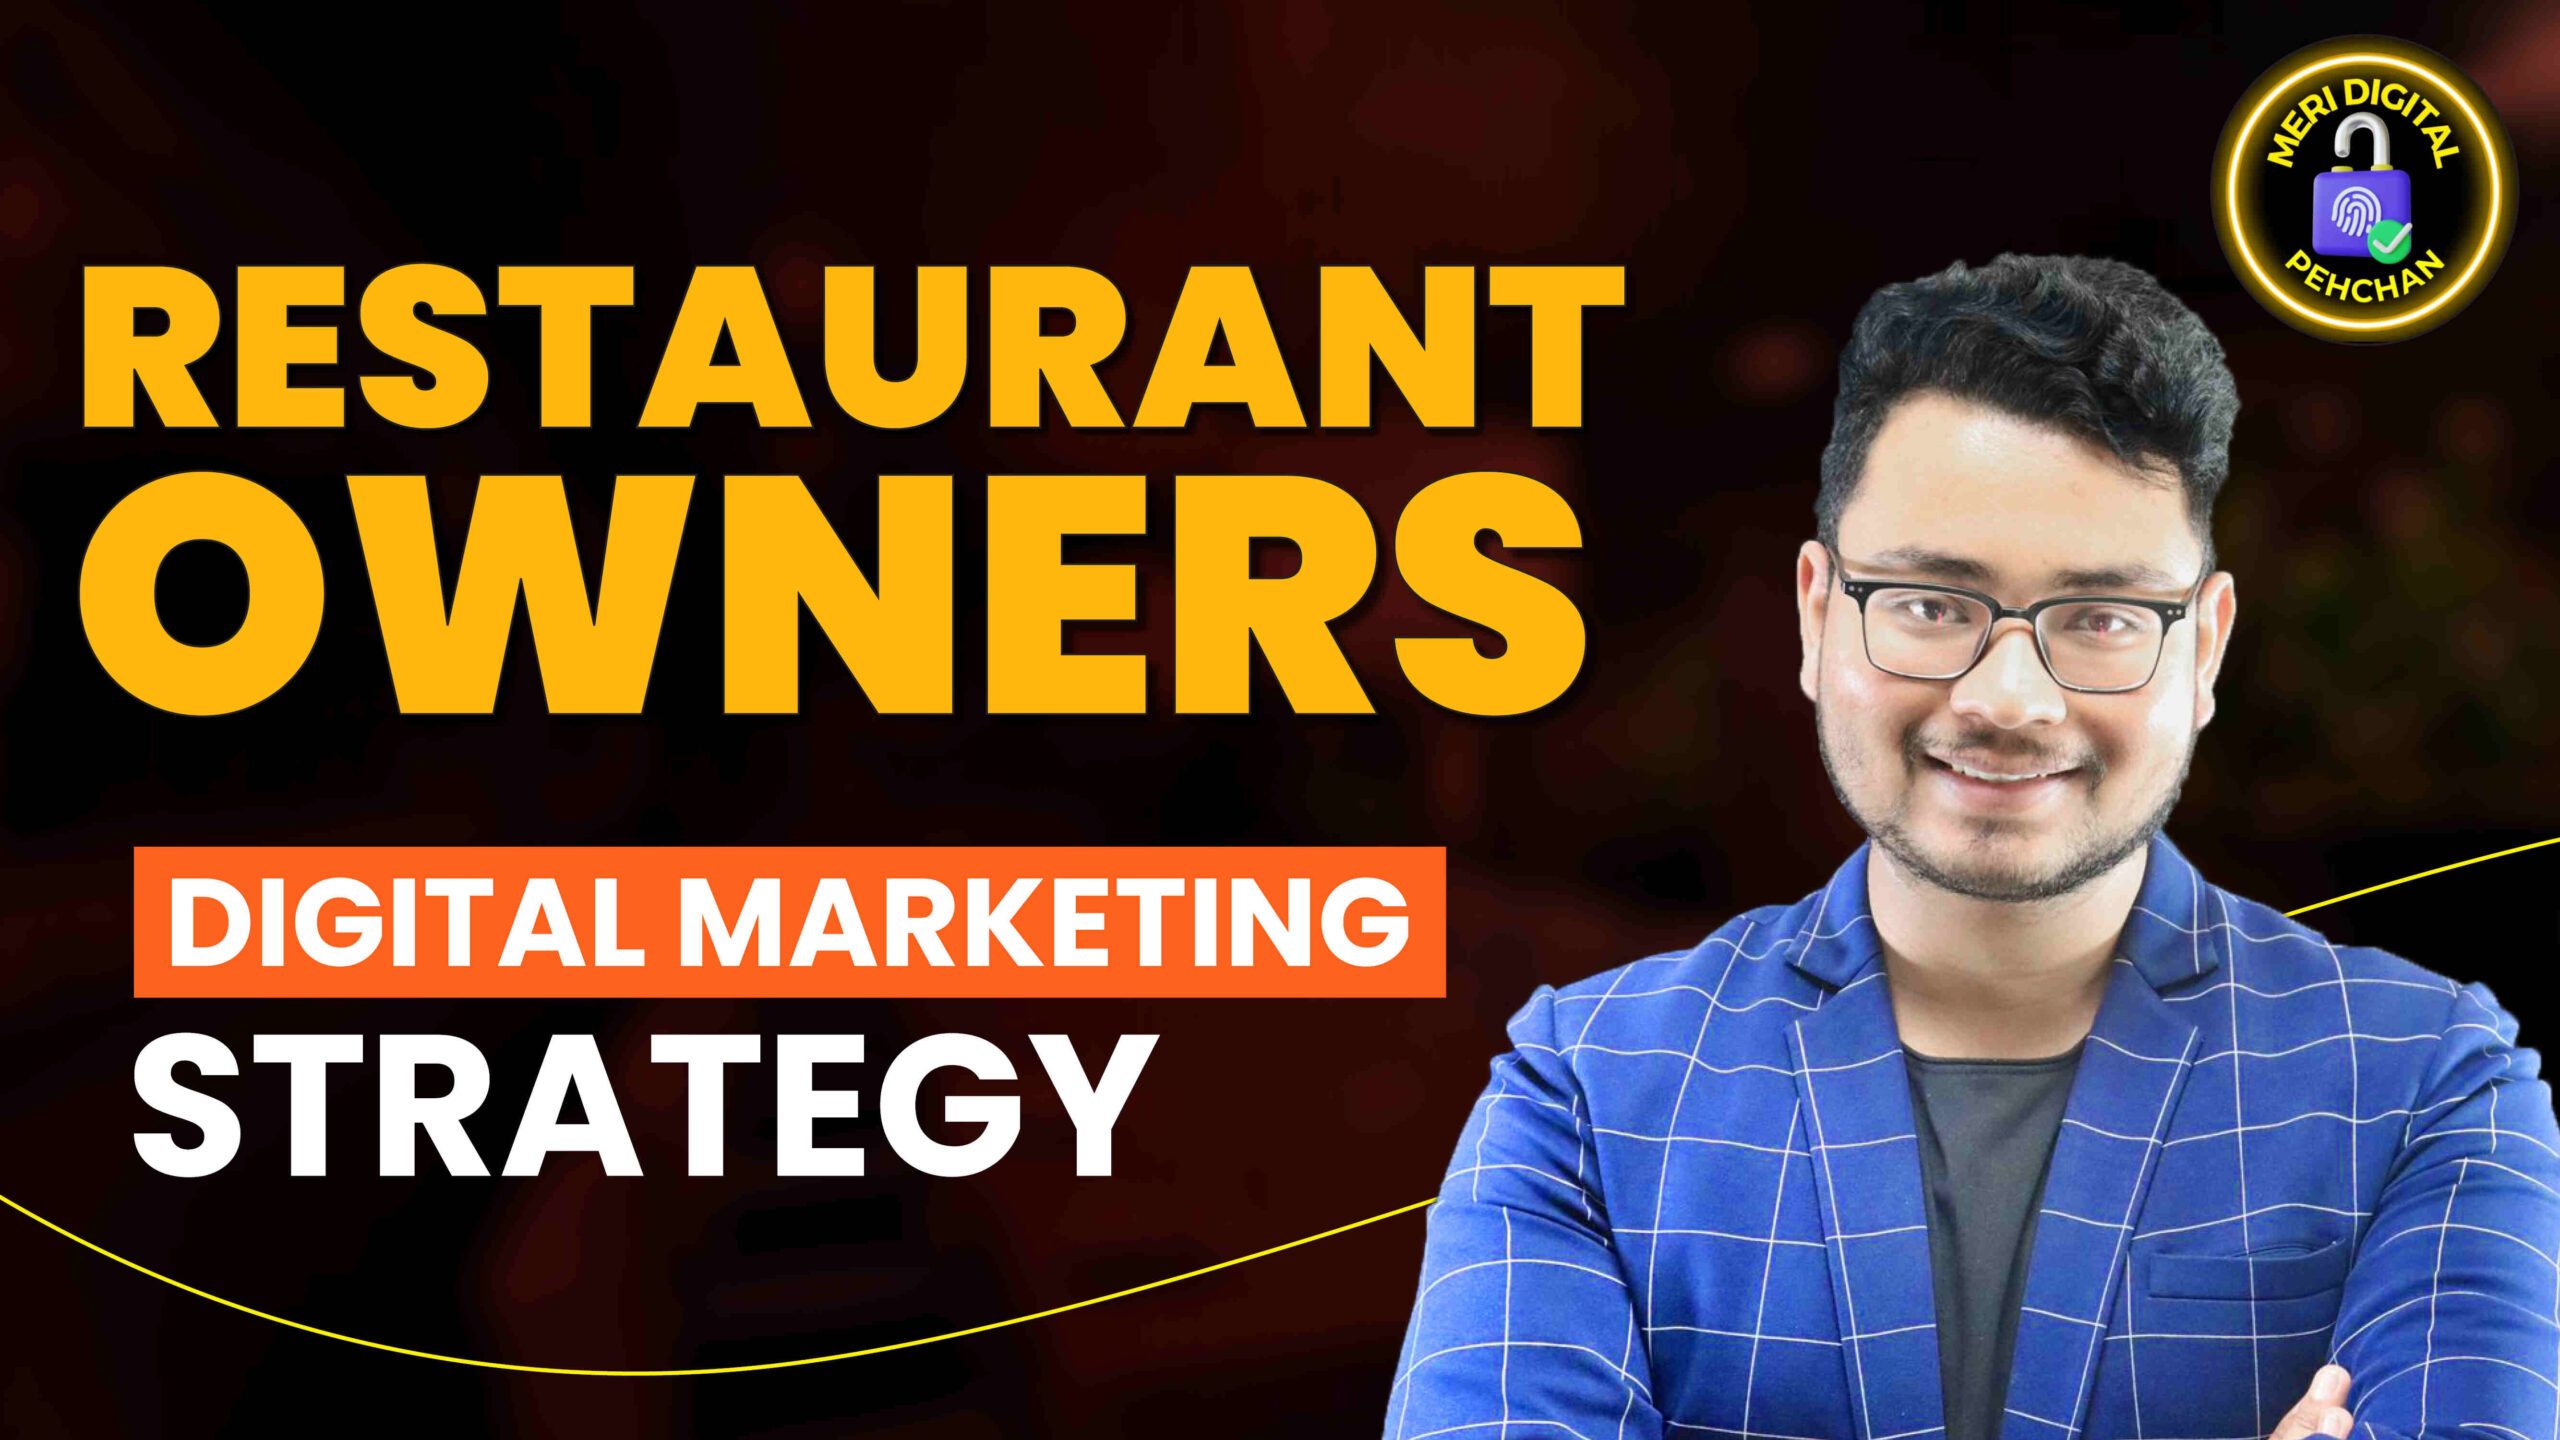 Digital Marketing Strategy for Restaurant Owners